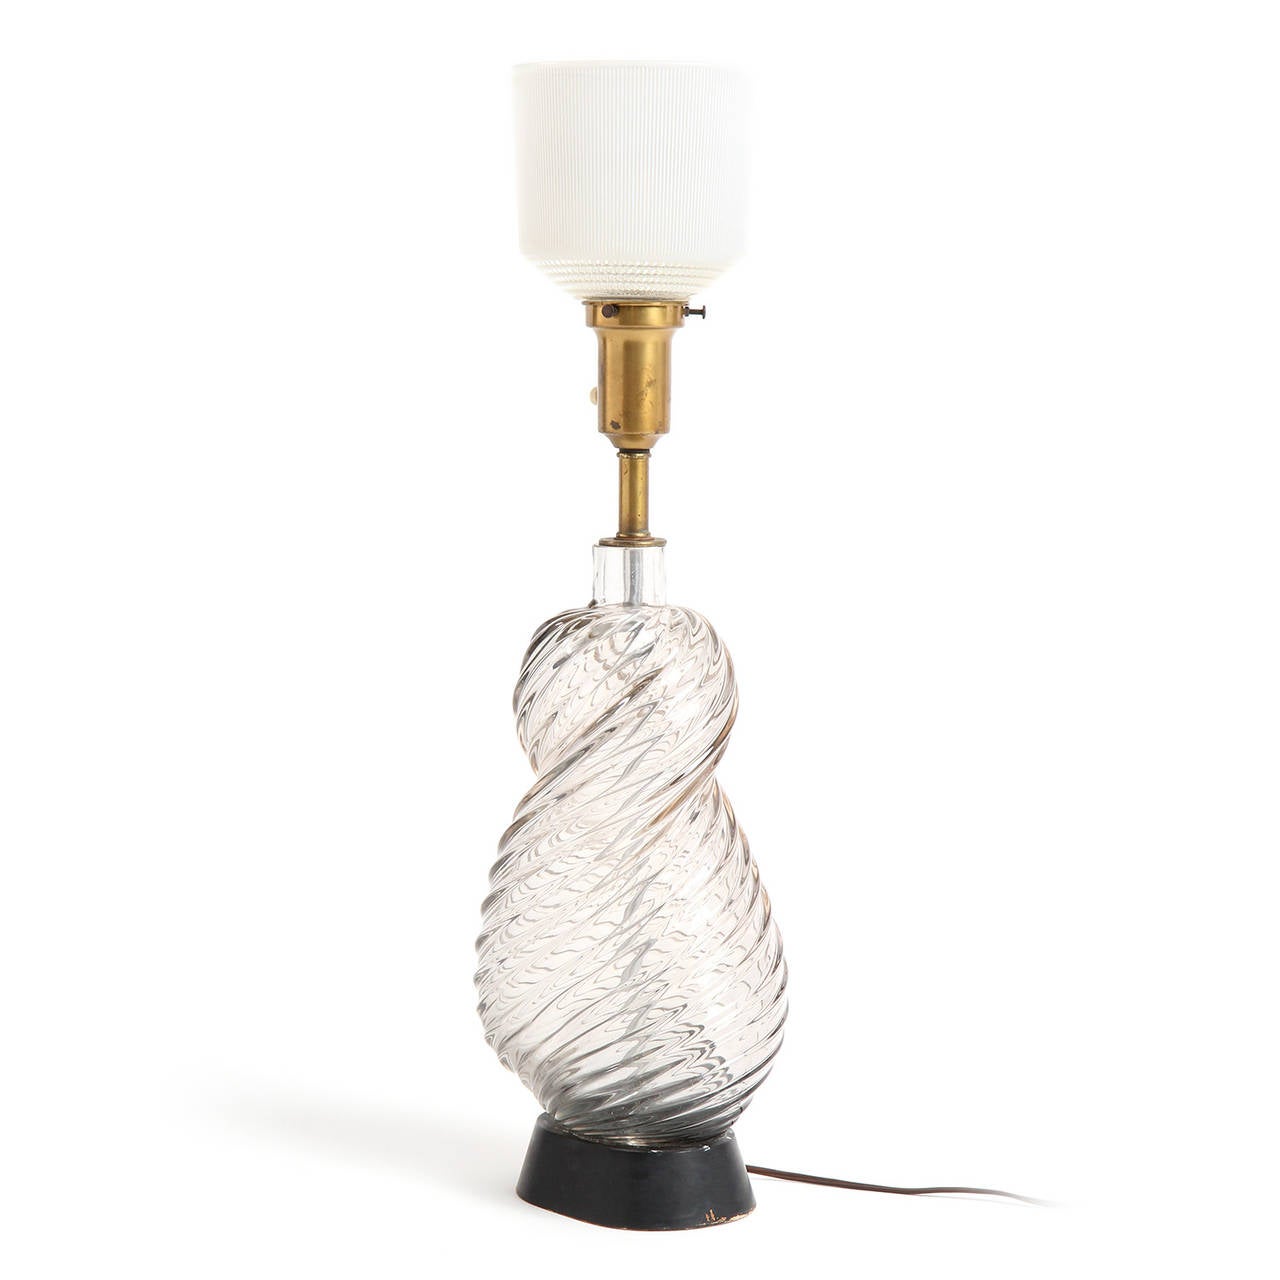 A table lamp with an organic spiraling and striated form crafted of thick clear glass and resting on a lacquered wooden base.